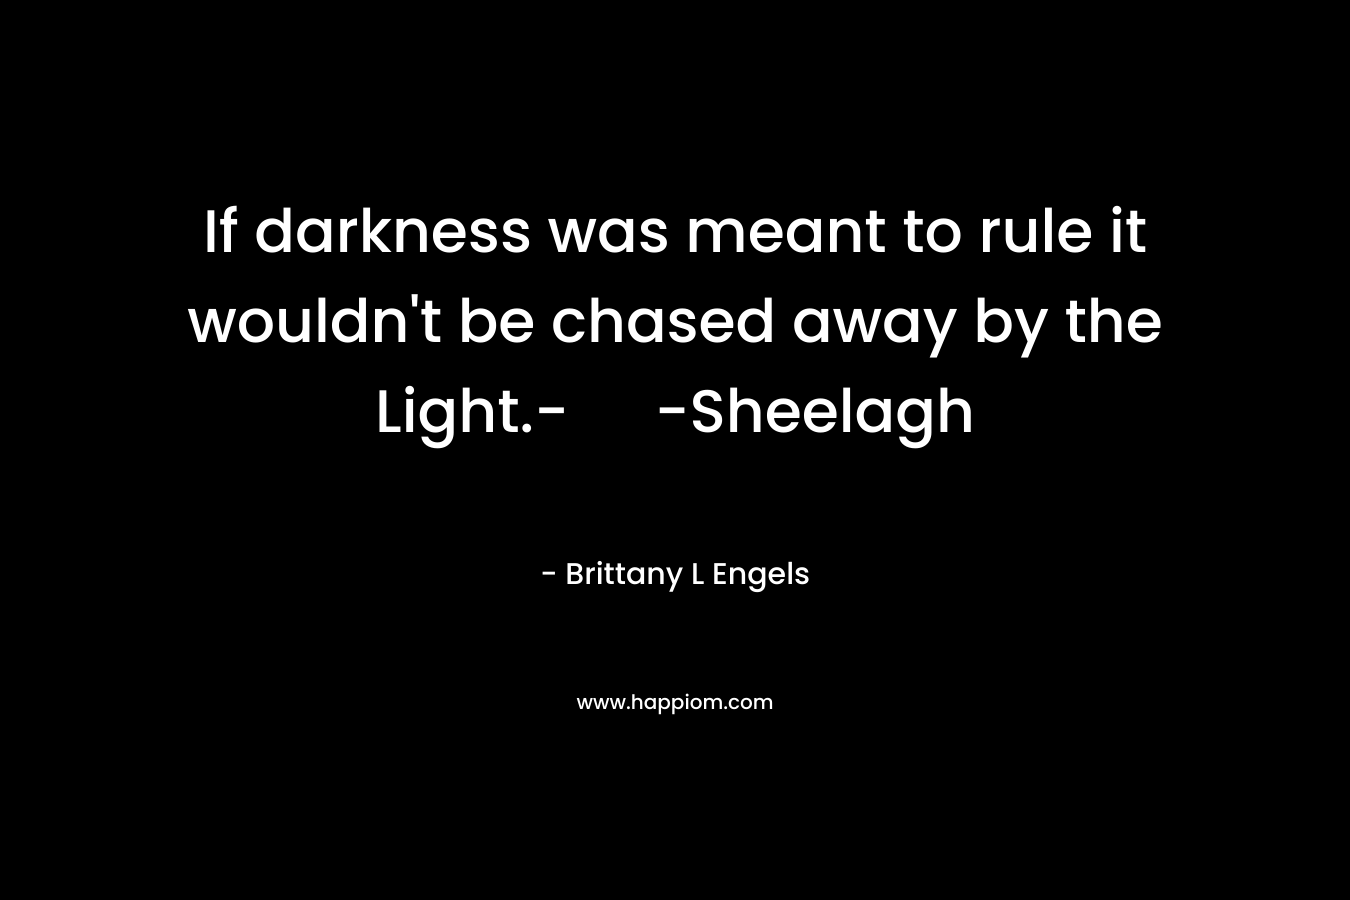 If darkness was meant to rule it wouldn't be chased away by the Light.- -Sheelagh